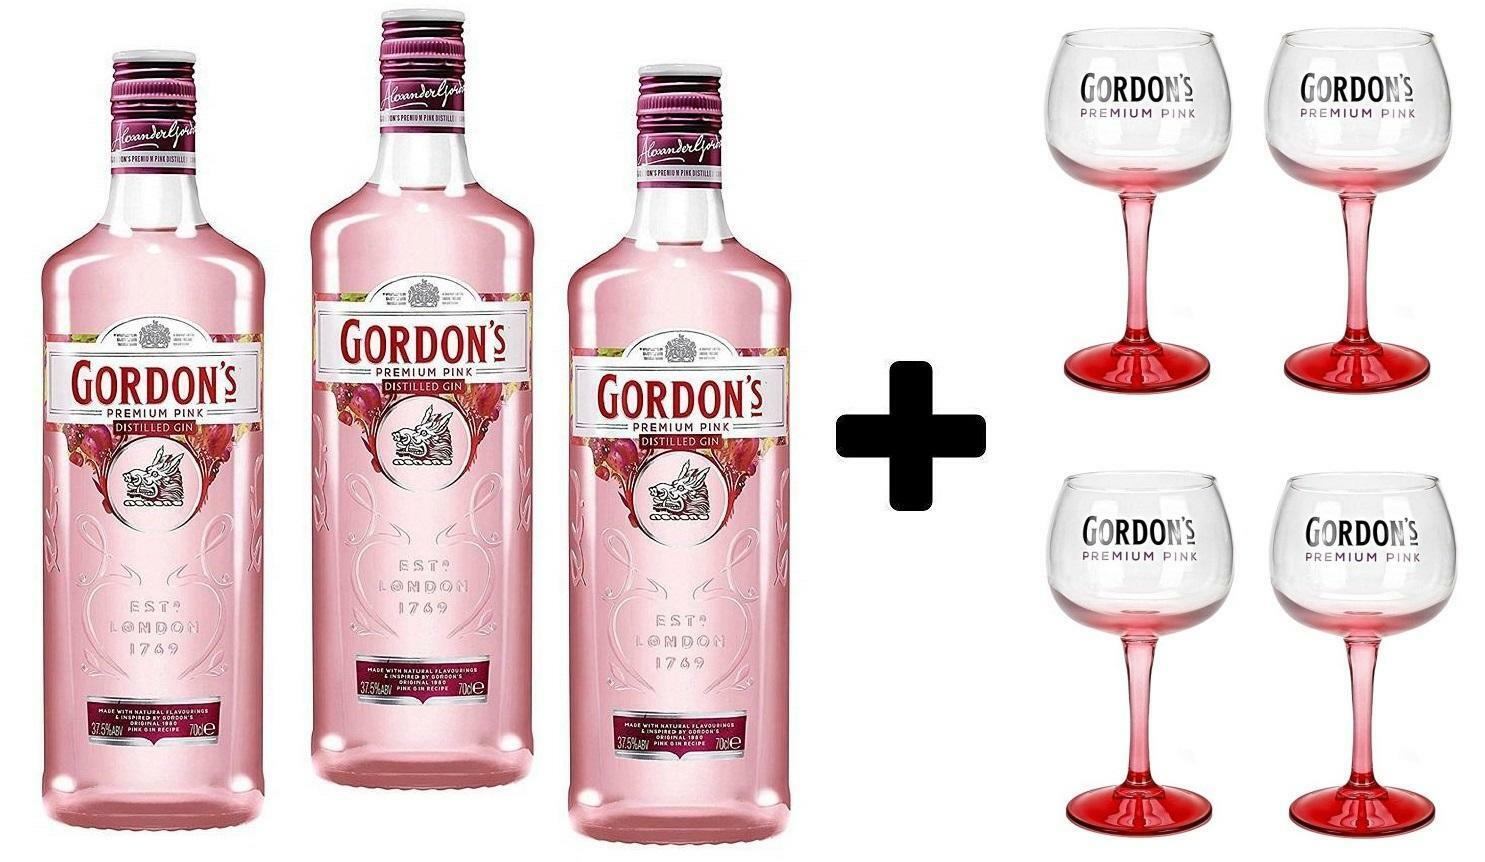 special pack special pack gin gordon's pink 3 bottiglie + 4 copa glass